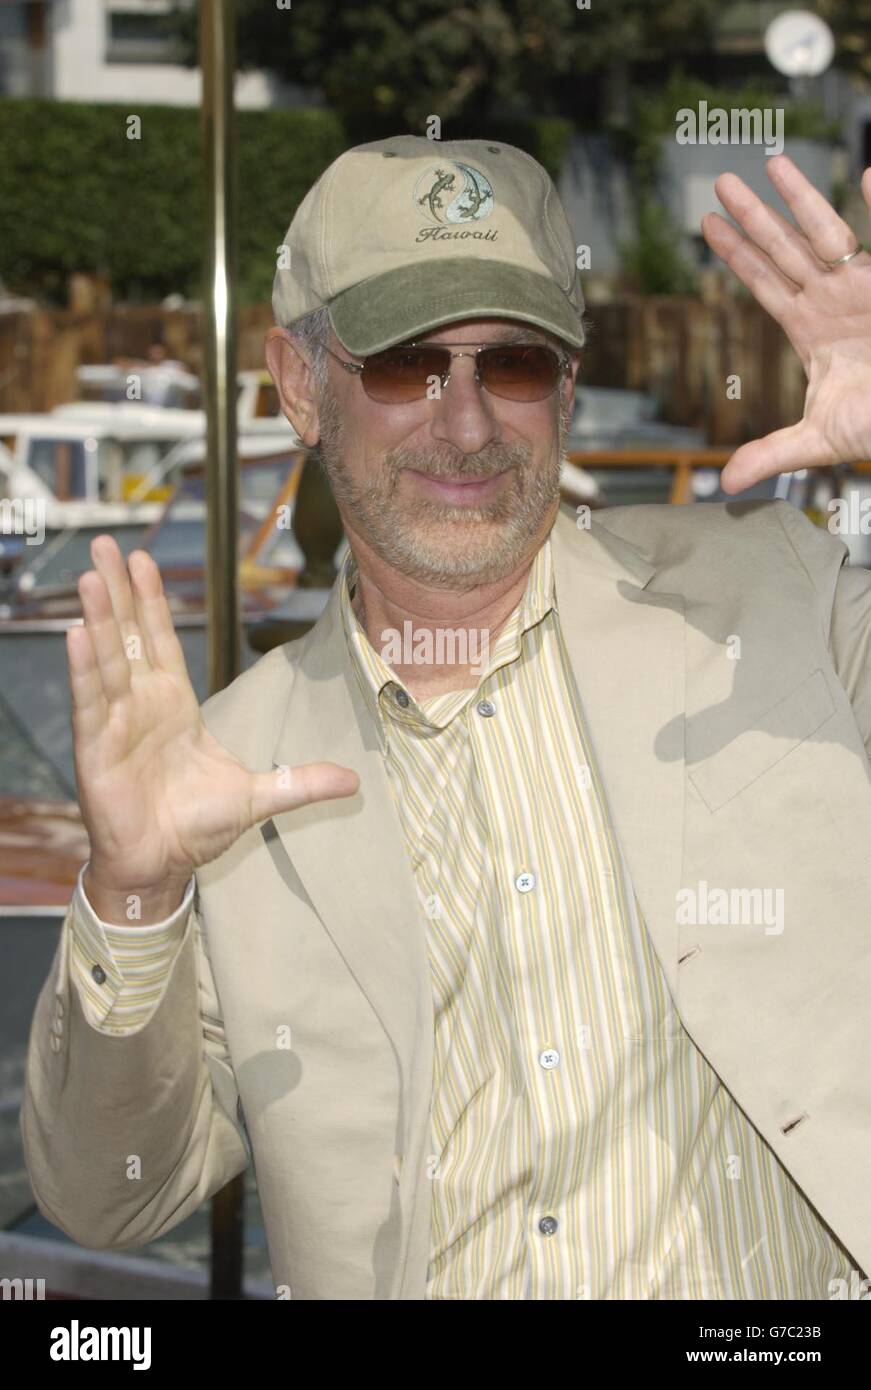 Director Steven Spielberg arrvies at the Lido in Venice to promote his new film Terminal during the 61st International Venice Film Festival. Stock Photo